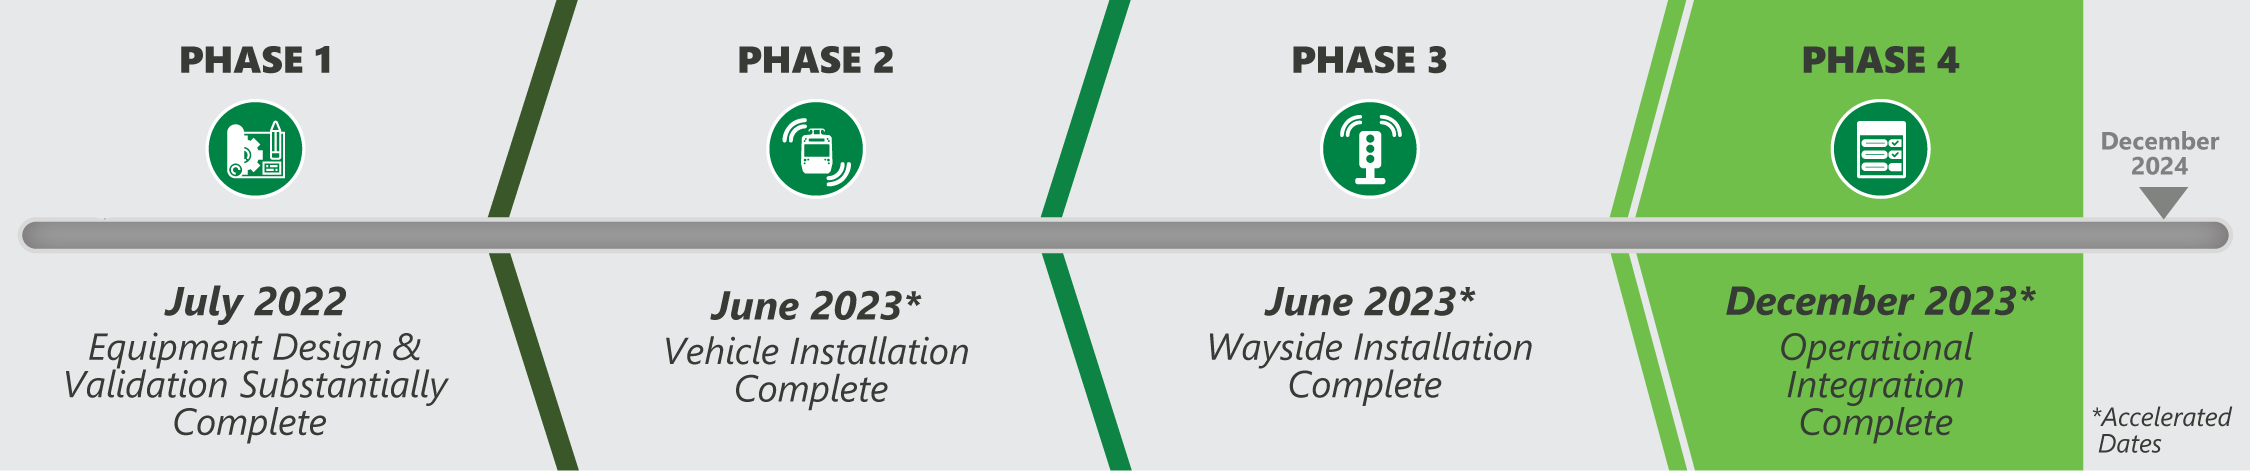 a timeline: phase 1, July 2022, Equipment Design & Validation Substantially Complete; Phase 2, June 2023, Vehicle Installation Complete; Phase 3, June 2023, Wayside Installation Complete; Phase 4, December 2023, Operational Integration Complete